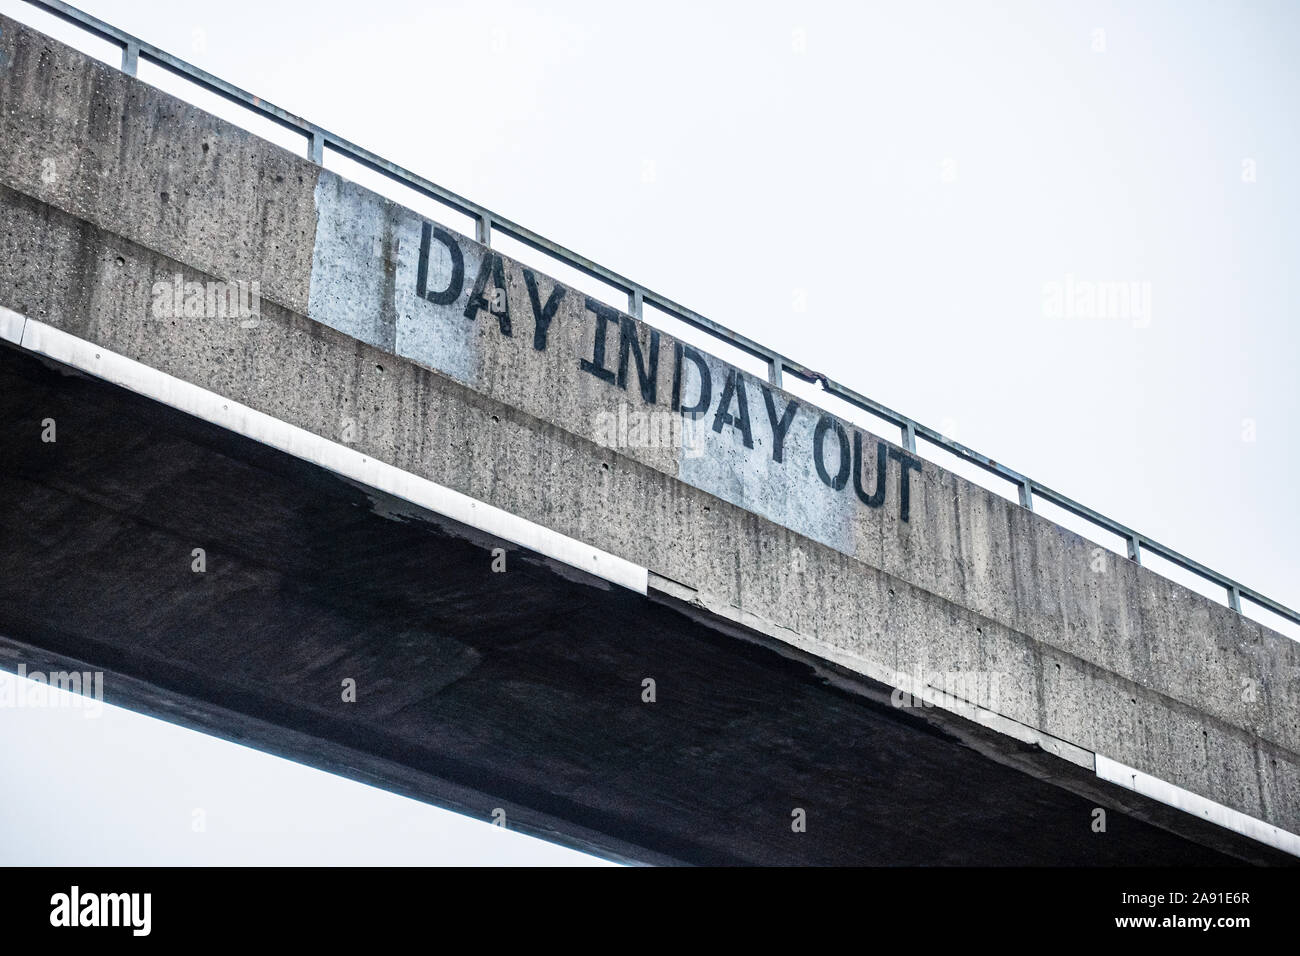 Graffiti on a pedestrian bridge over a road, reading, Day In Day Out, Gateshead, Tyne and Wear, England, UK Stock Photo